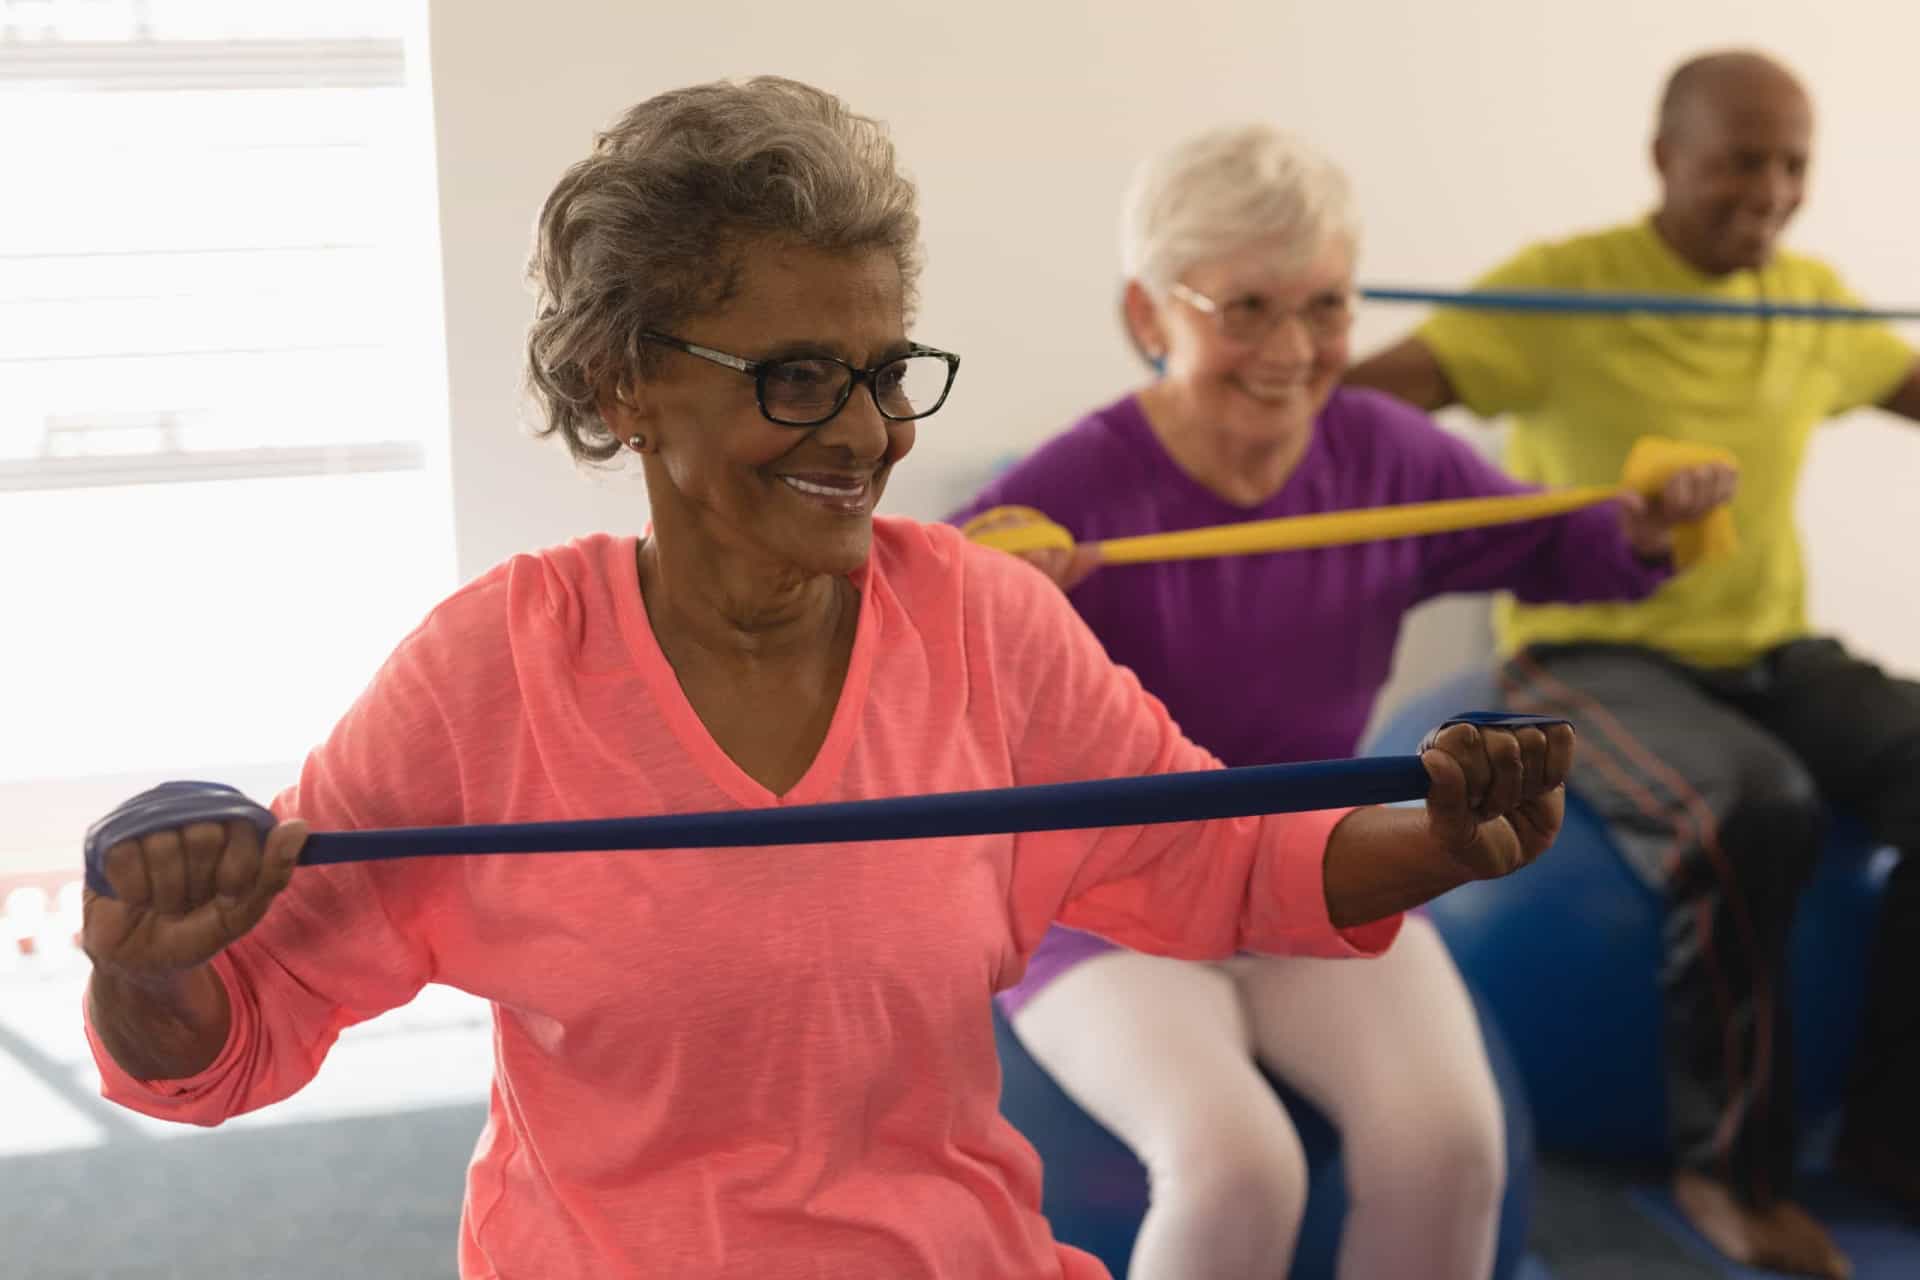 <span>Exercise has been suggested as one of the best ways to reduce the risk of dementia. It keeps you healthy mentally, physically, and emotionally.</span><p>You may also like:<a href="https://www.starsinsider.com/n/238579?utm_source=msn.com&utm_medium=display&utm_campaign=referral_description&utm_content=443127v4en-ca"> The most beautiful actresses ever</a></p>